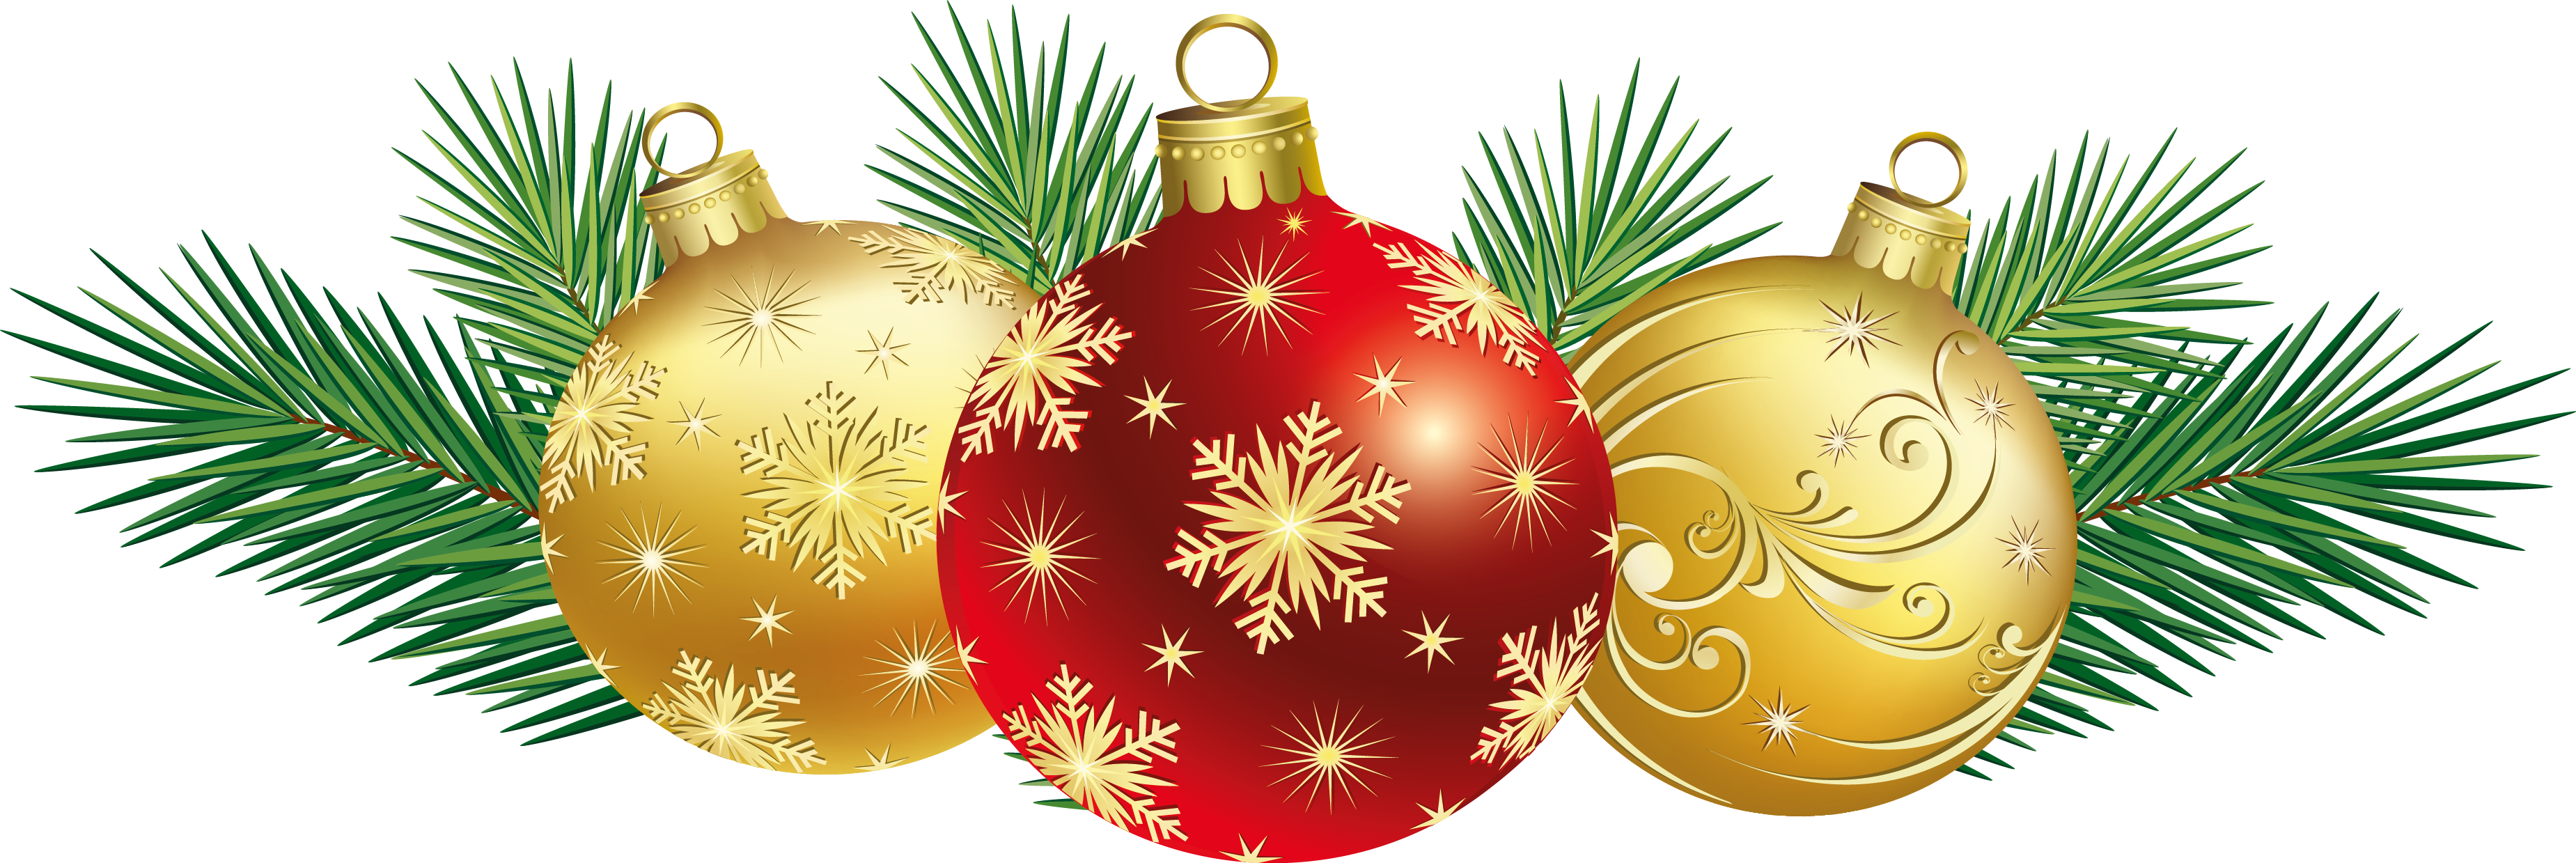 christmas clipart png - photo #39